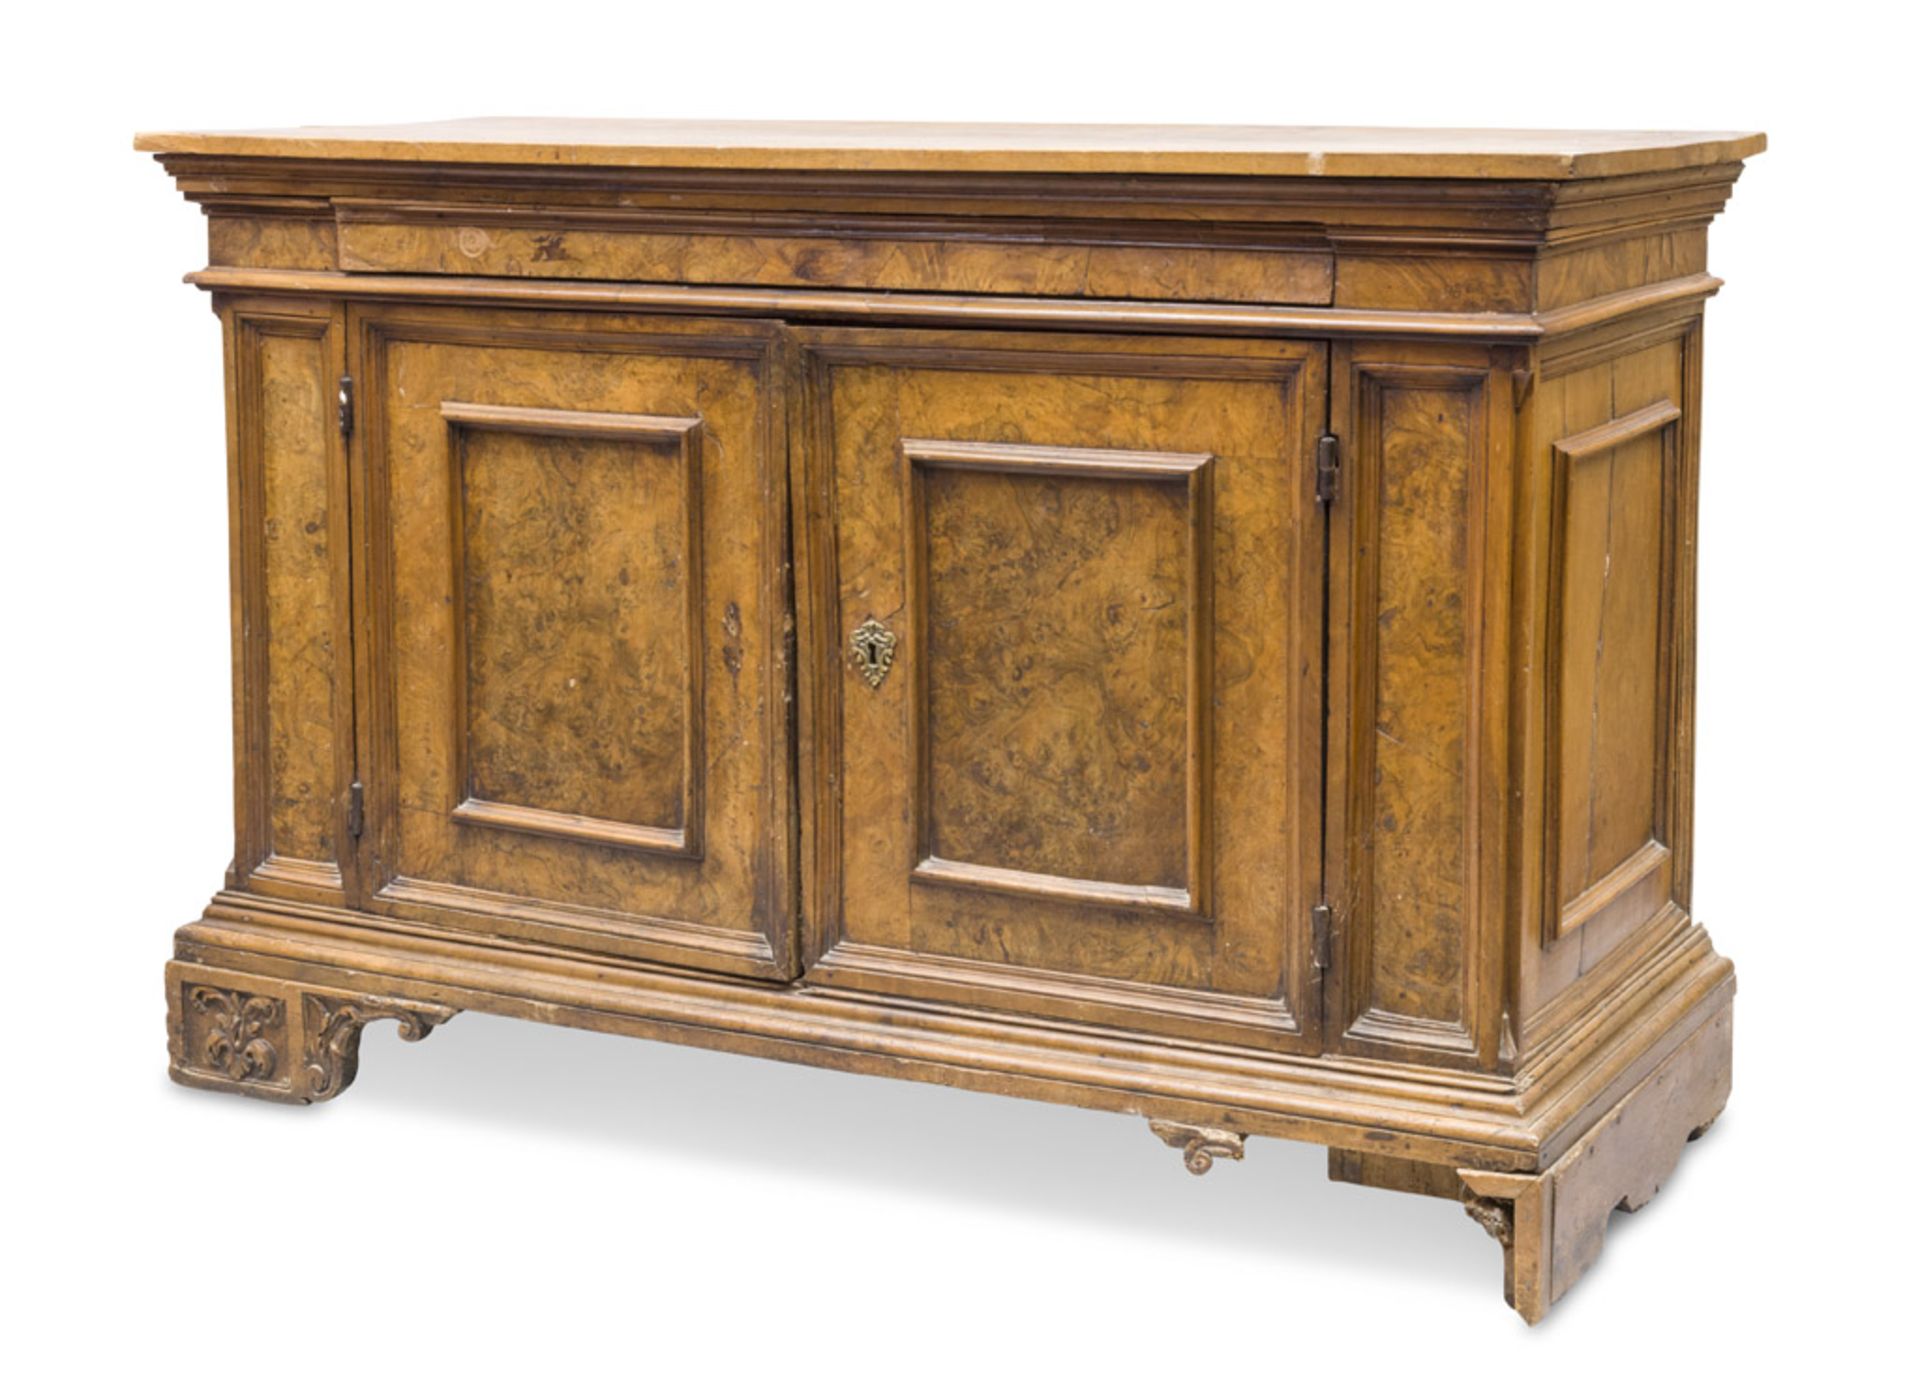 RARE SIDEBOARD IN WALNUT AND BRIAR WALNUT, PERUGIA EARLY 18TH CENTURY architectural front with